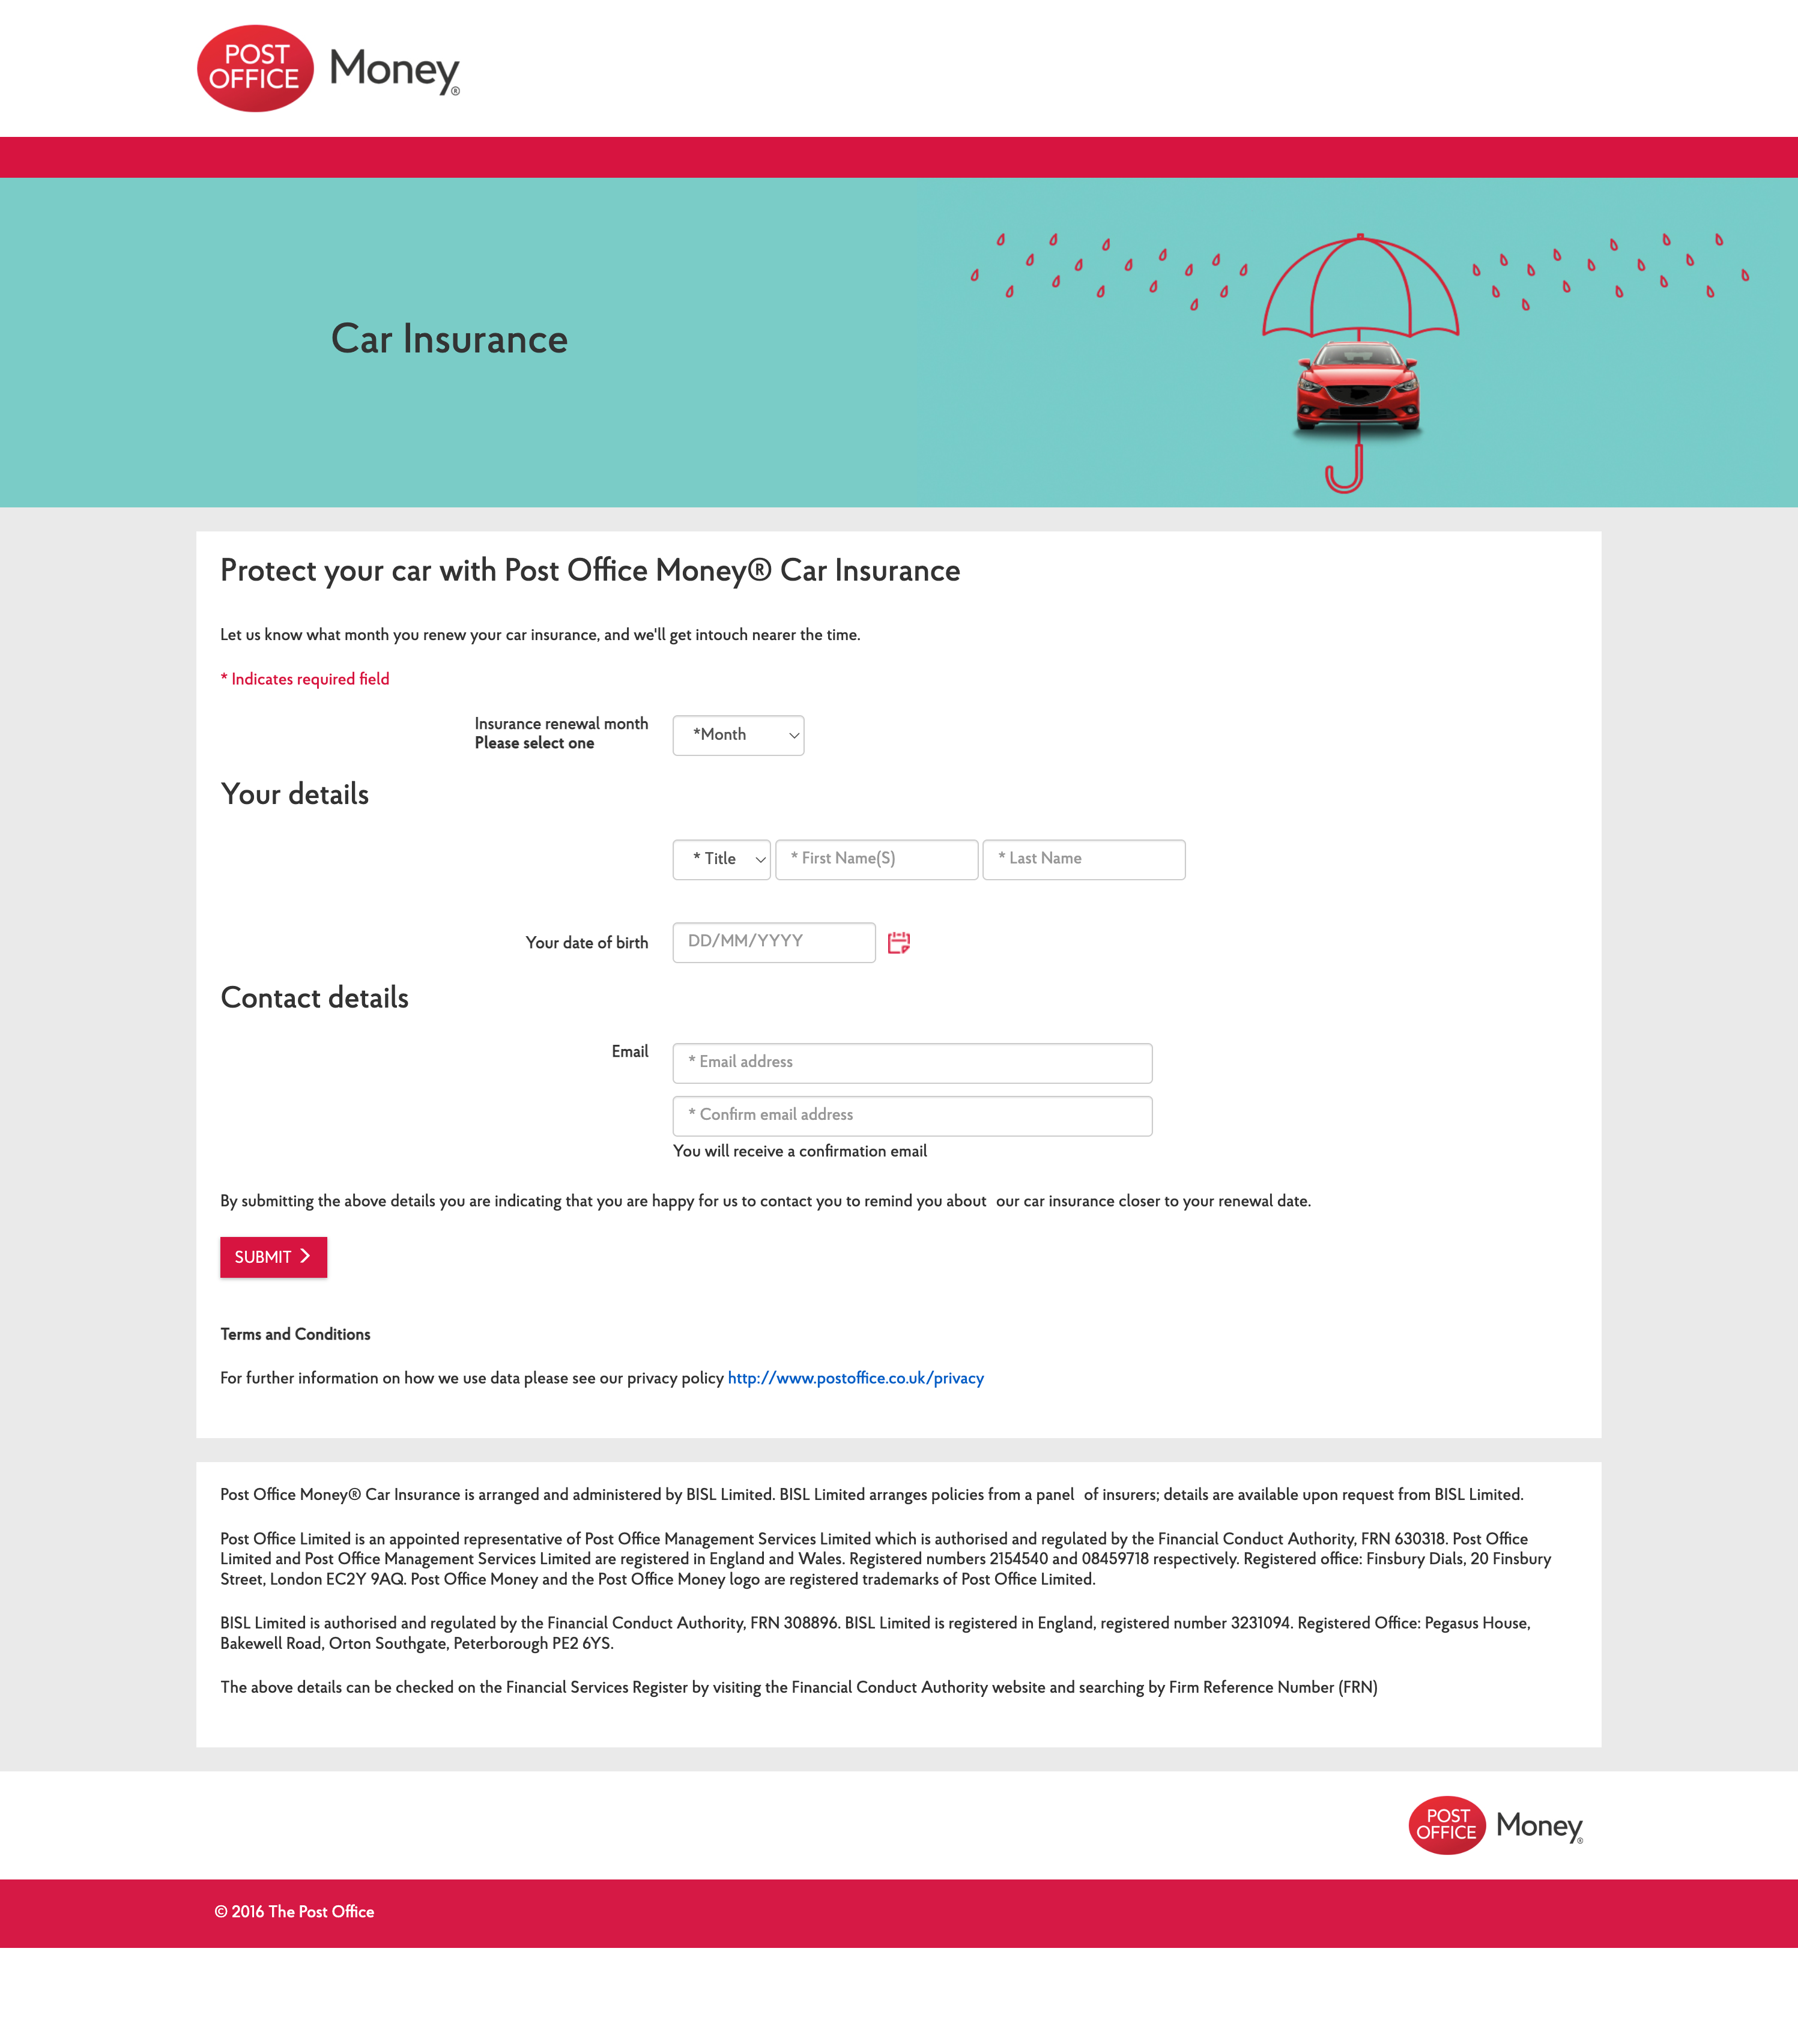 Post Office car insurance landing page